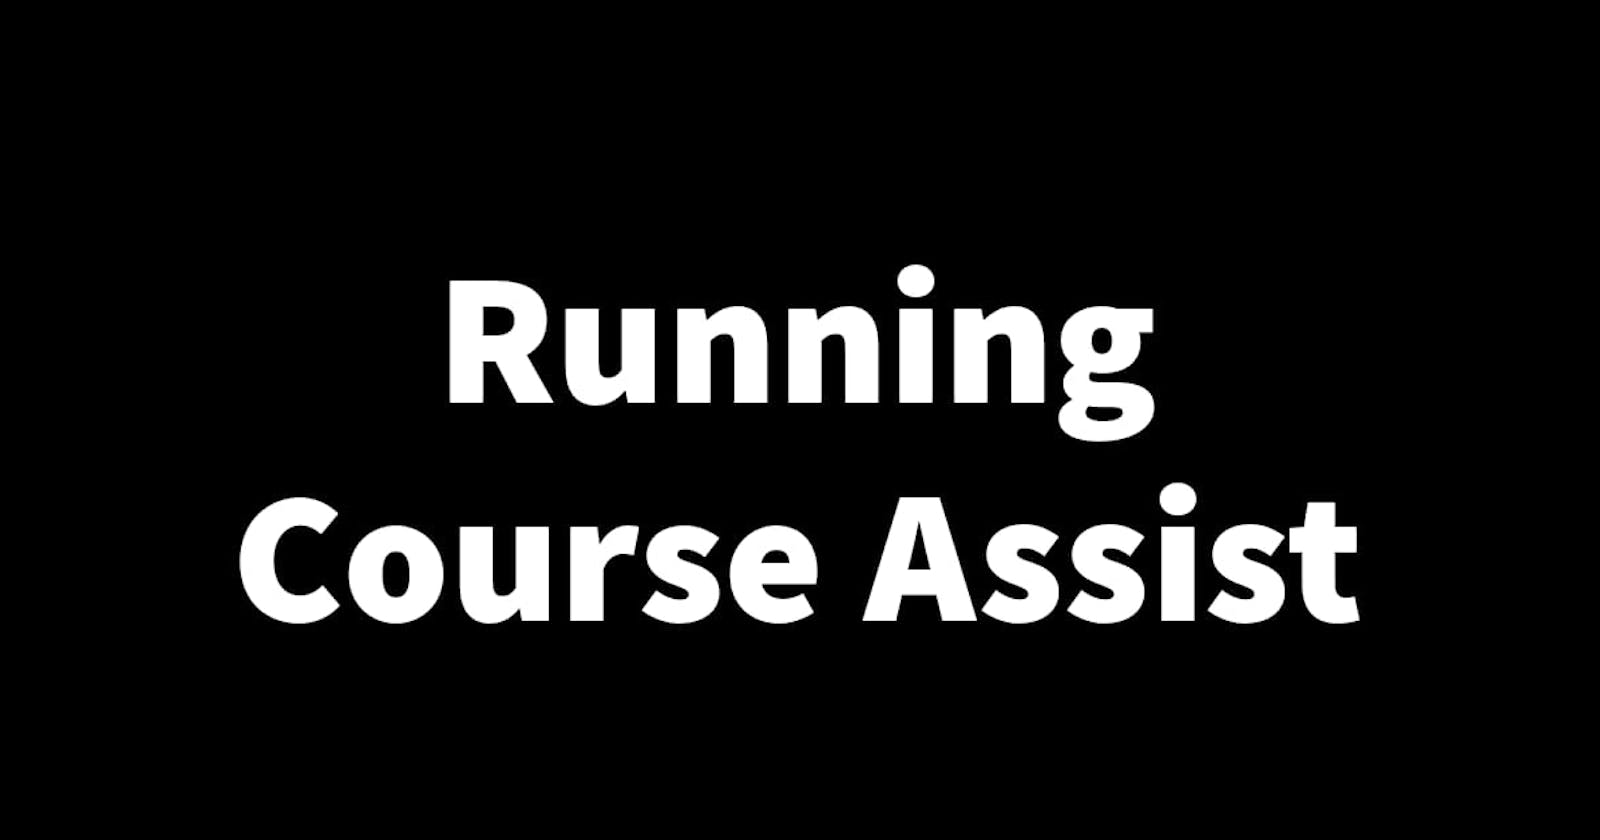 Running Course Assist Part 1: Creating a project launch plan and budget.